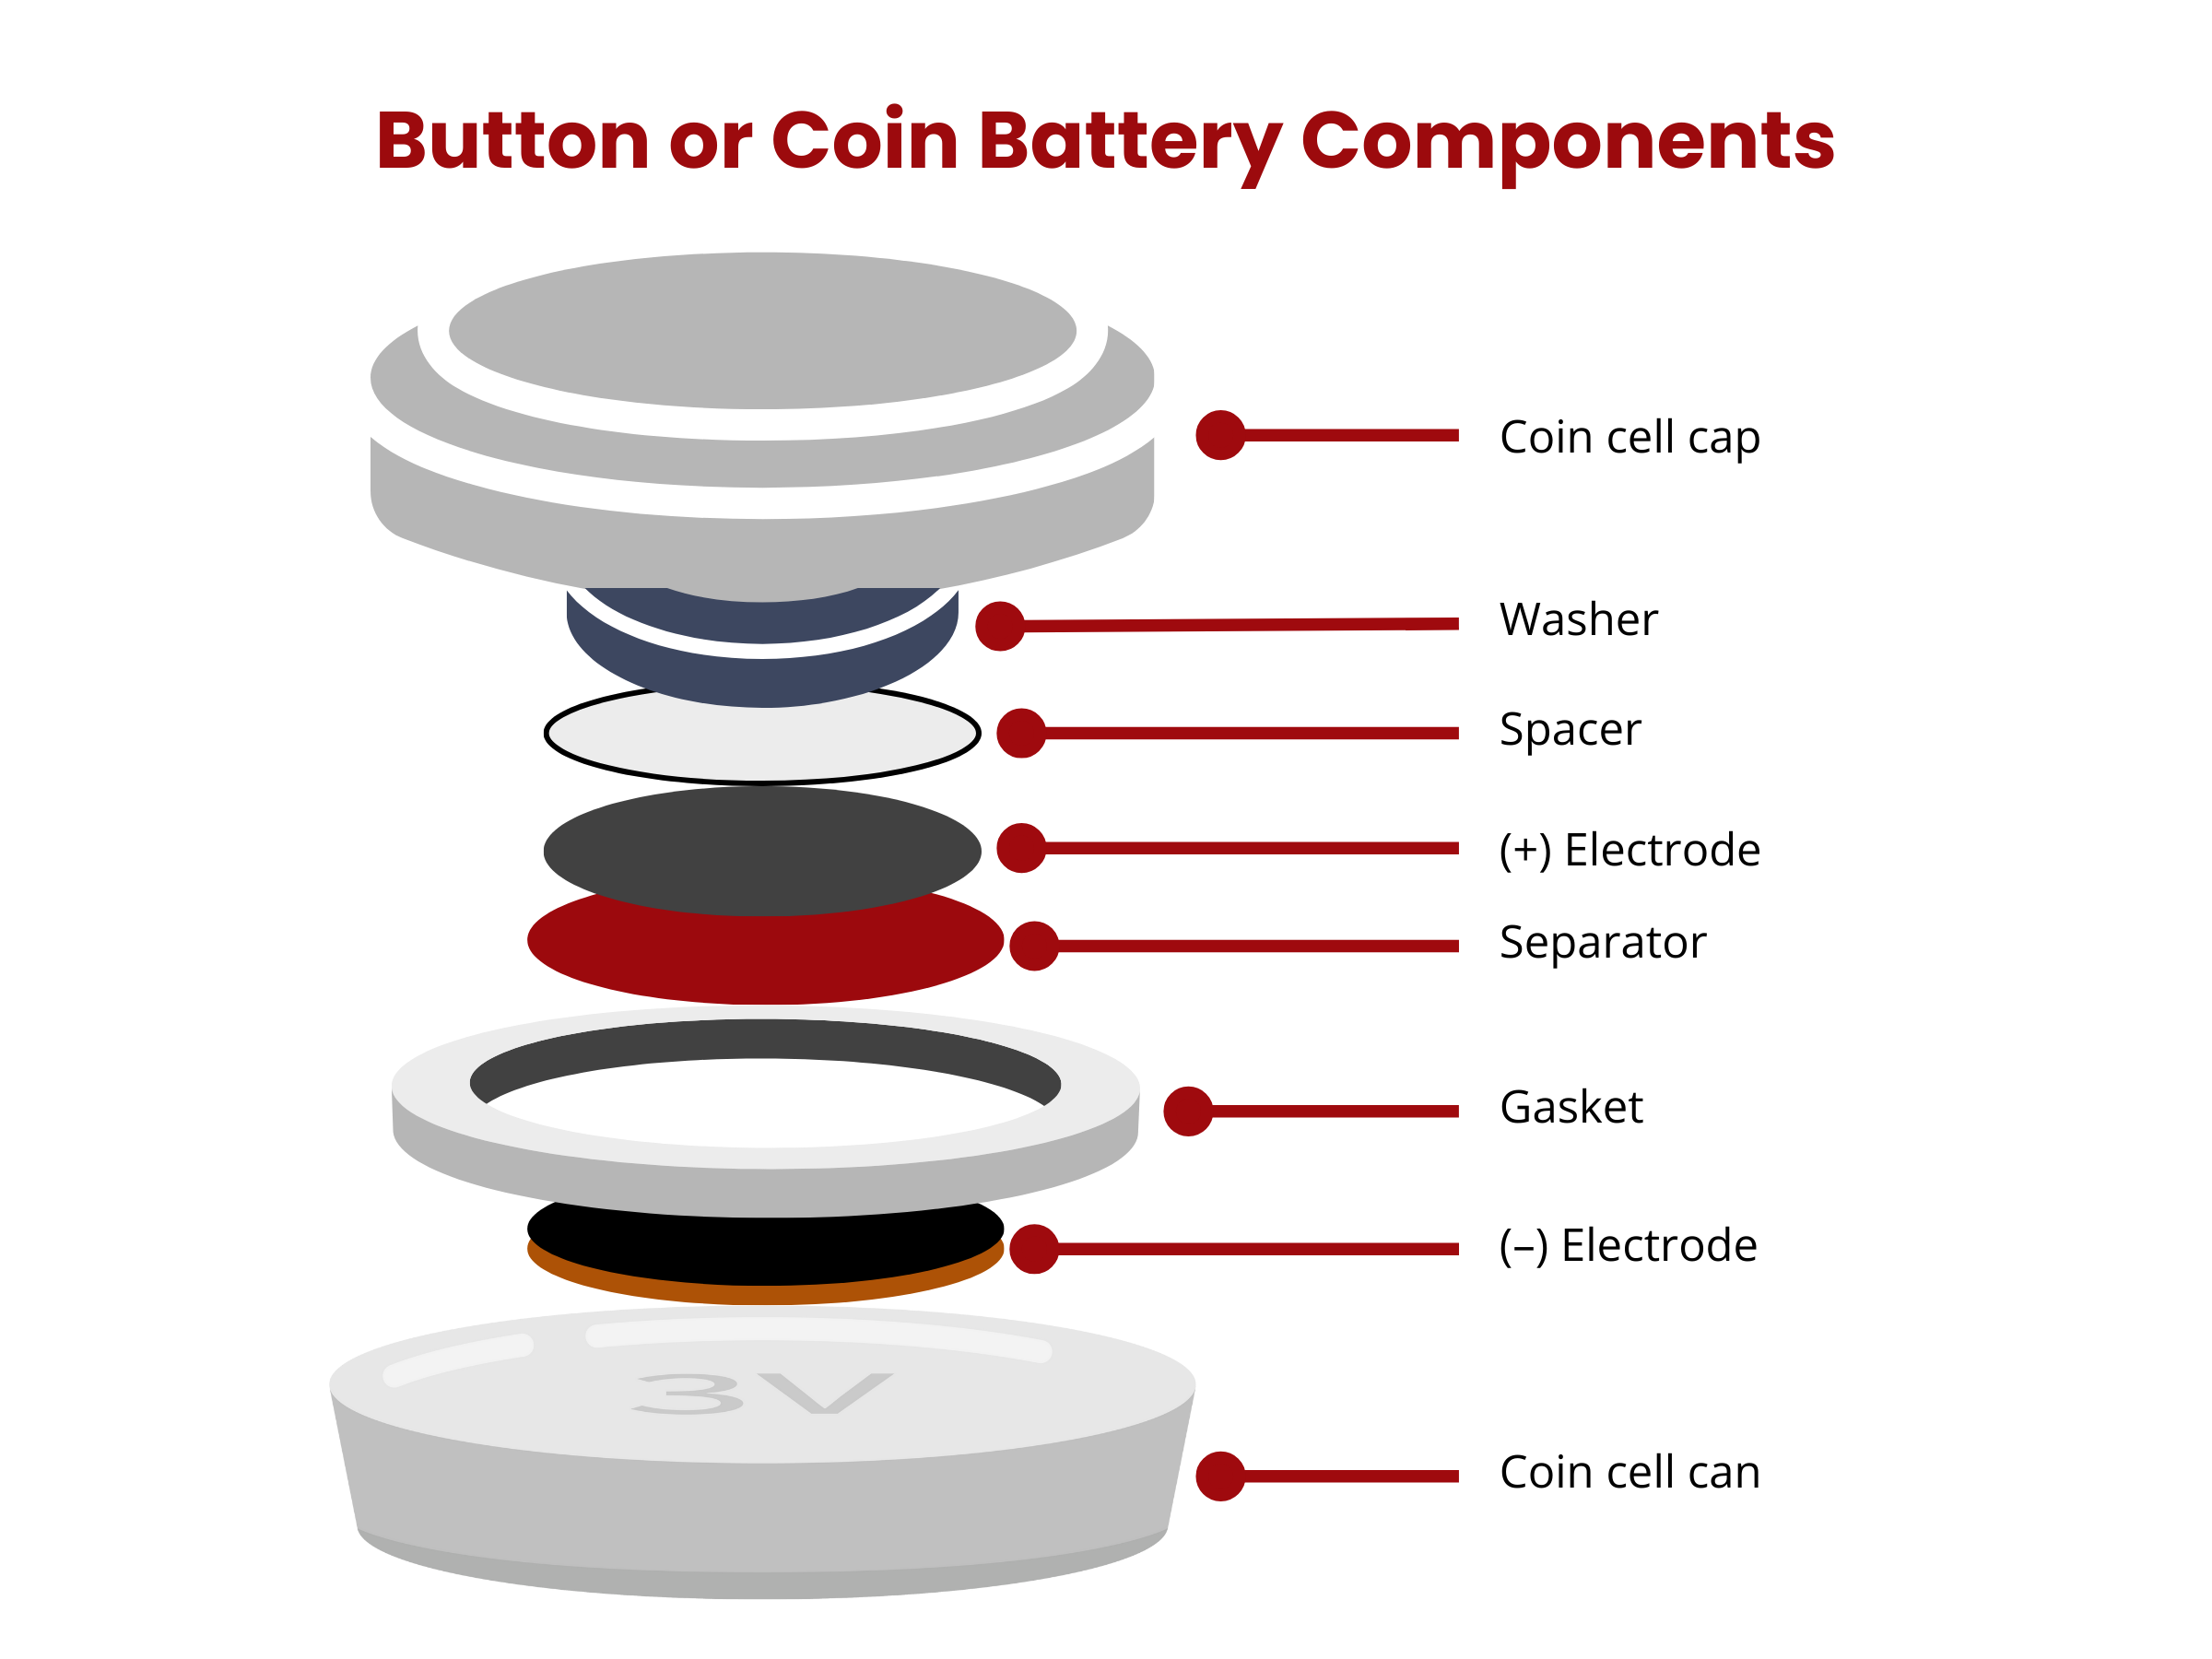 Button or coin battery components